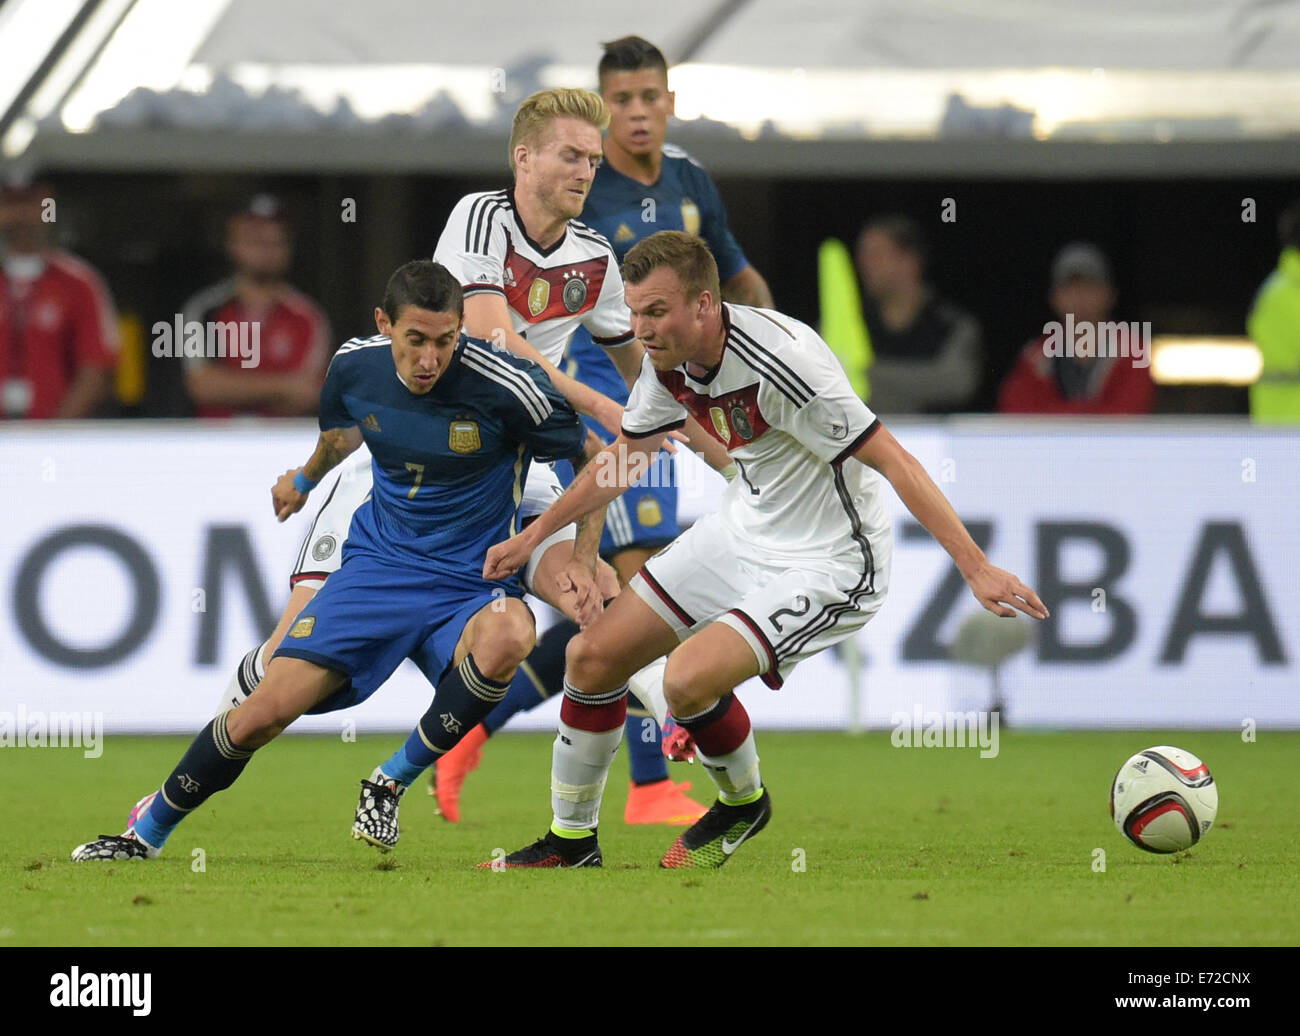 Duesseldorf, Germany. 03rd Sep, 2014. Germany's Kevin Grosskreutz (R) and Argentina's Angel Di Maria (L) vie for the ball during the international match between Germany and Argentina at Esprit Arena in Duesseldorf, Germany, 03 September 2014. Photo: BERND THISSEN/dpa/Alamy Live News Stock Photo